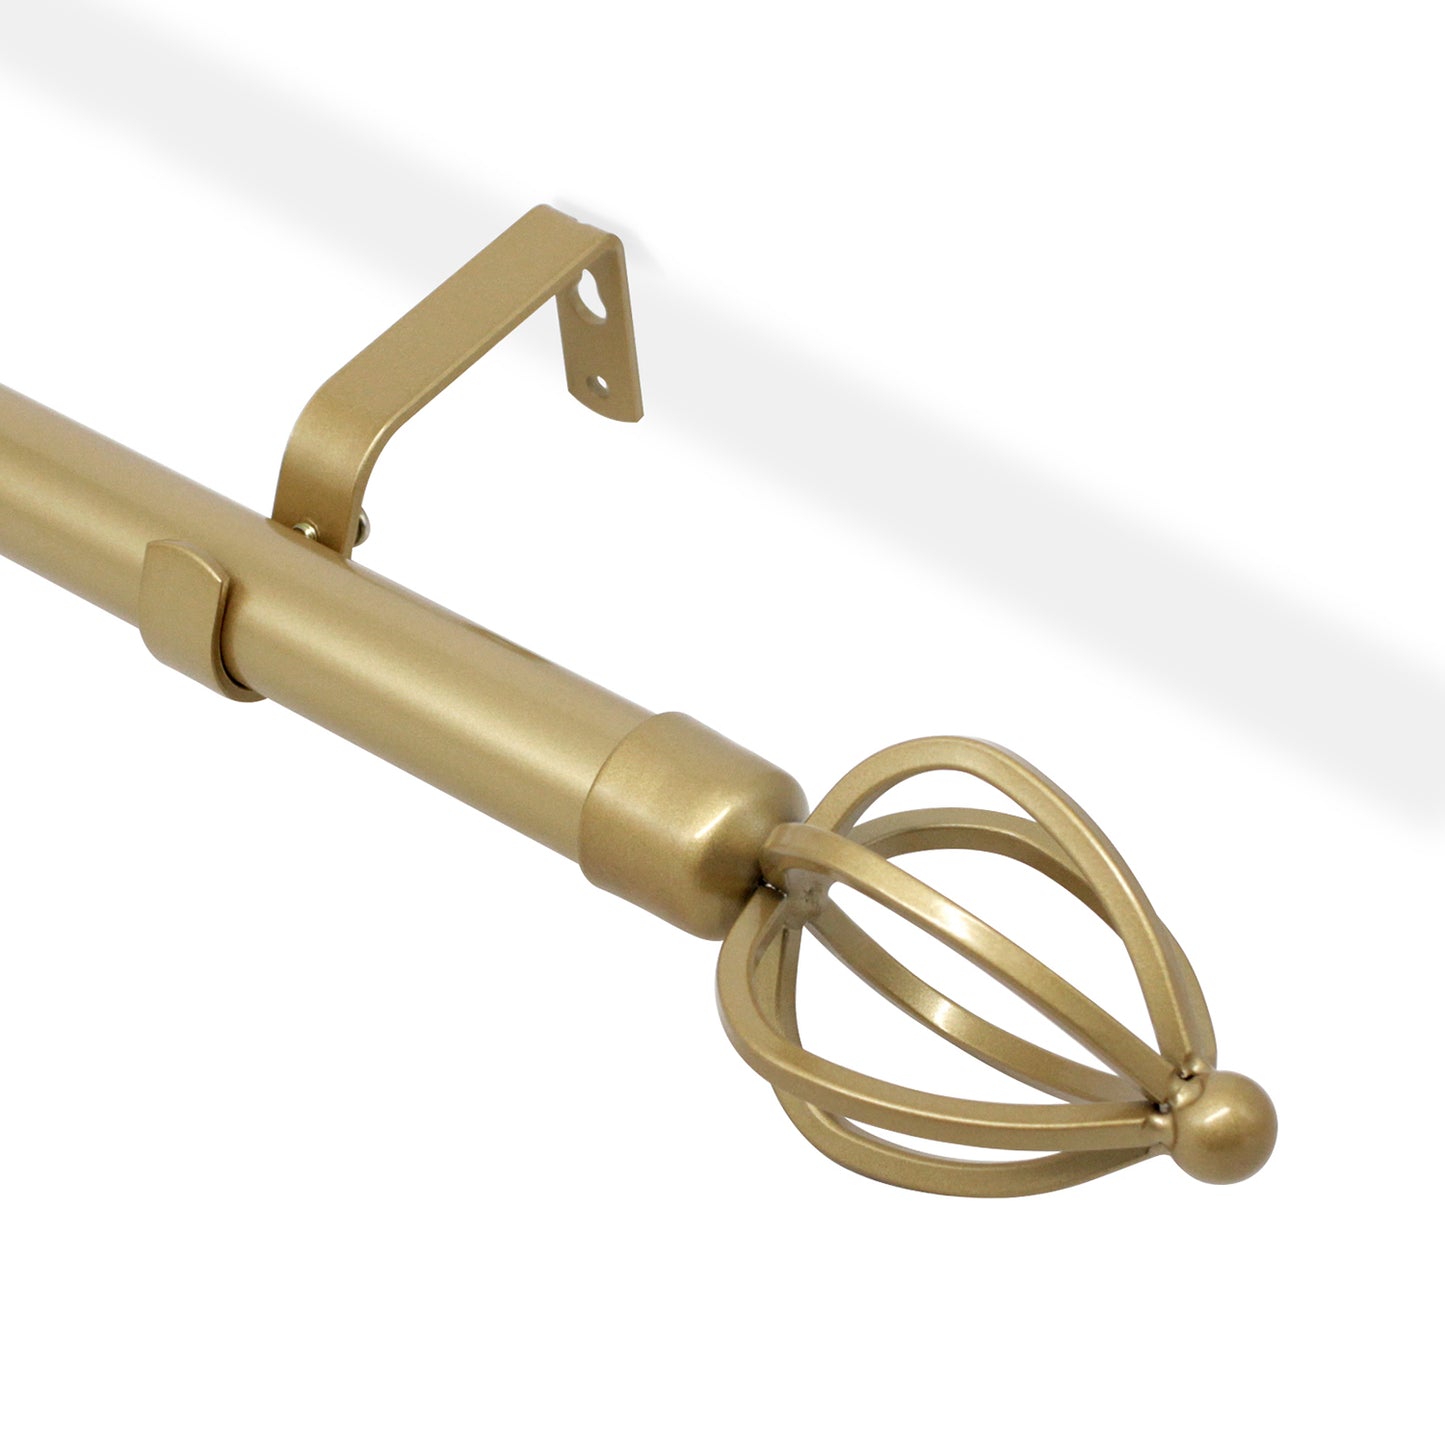 3/4 Inch Golden Curtain Rod Set with Cage Finials , 22 - 48 Inch